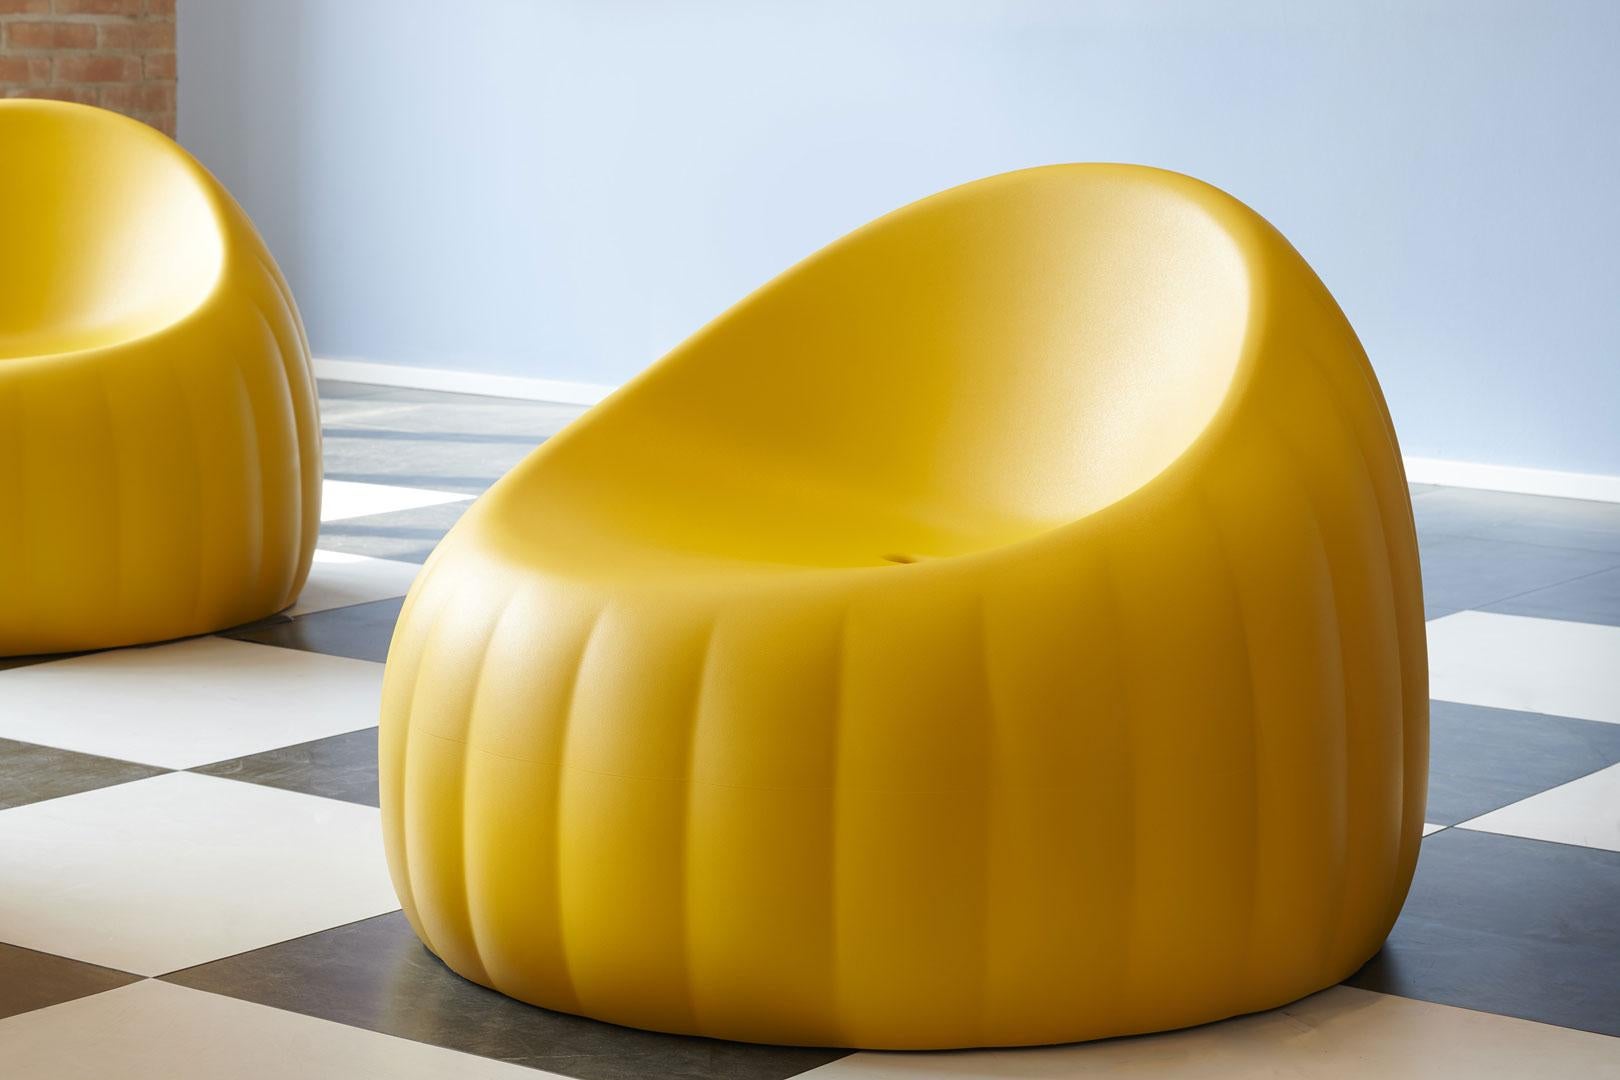 Soft Argil Gelée Lounge Armchair by Roberto Paoli
Dimensions: Ø 96 x H 64 cm. Seat Height: 37 cm.
Materials: Soft polyurethane.
Weight: 17 kg.

Available in three different color options: soft white, soft argil and soft yellow. This product is